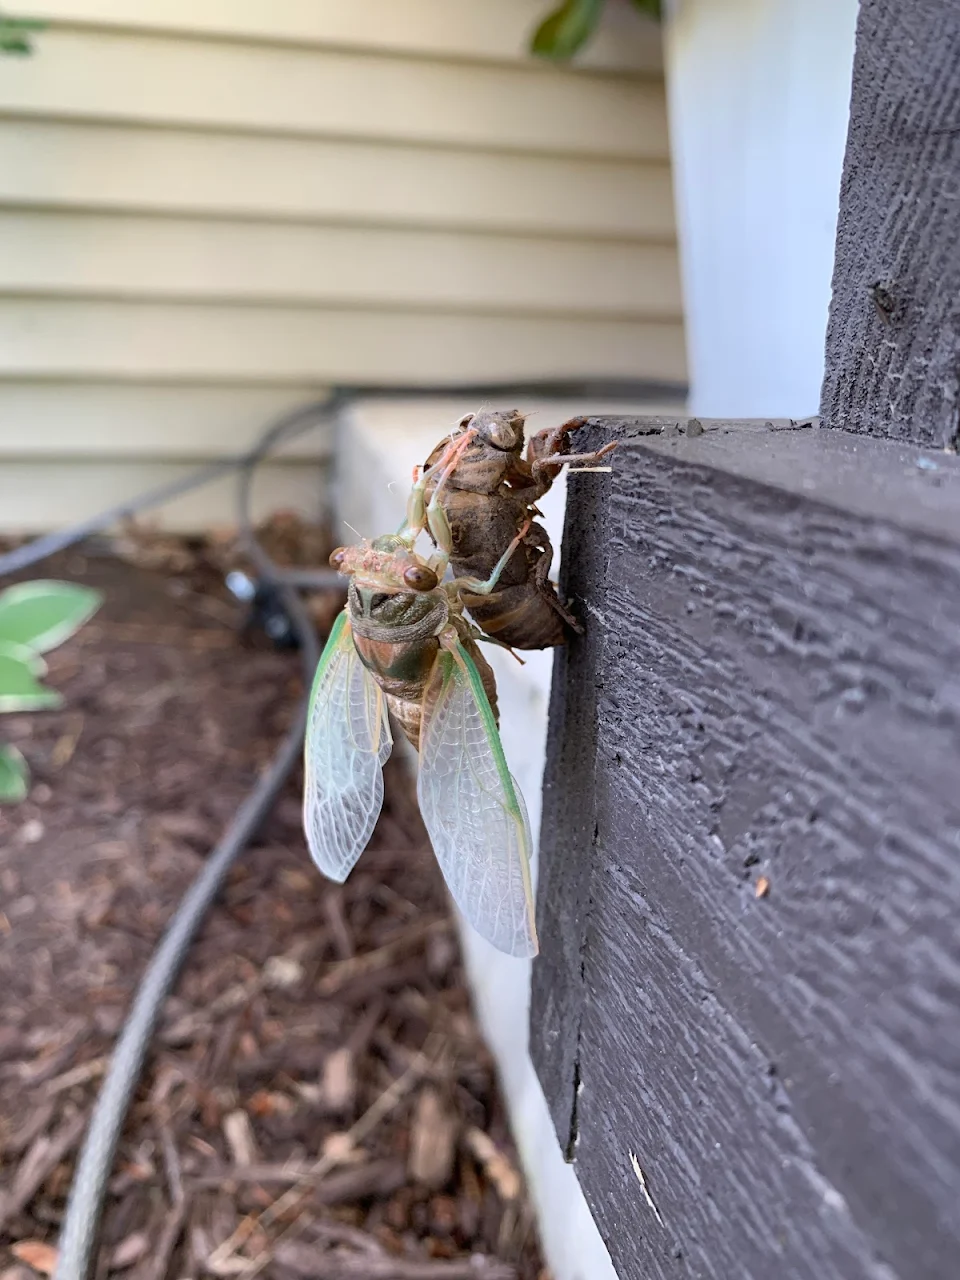 Cicada that just molted